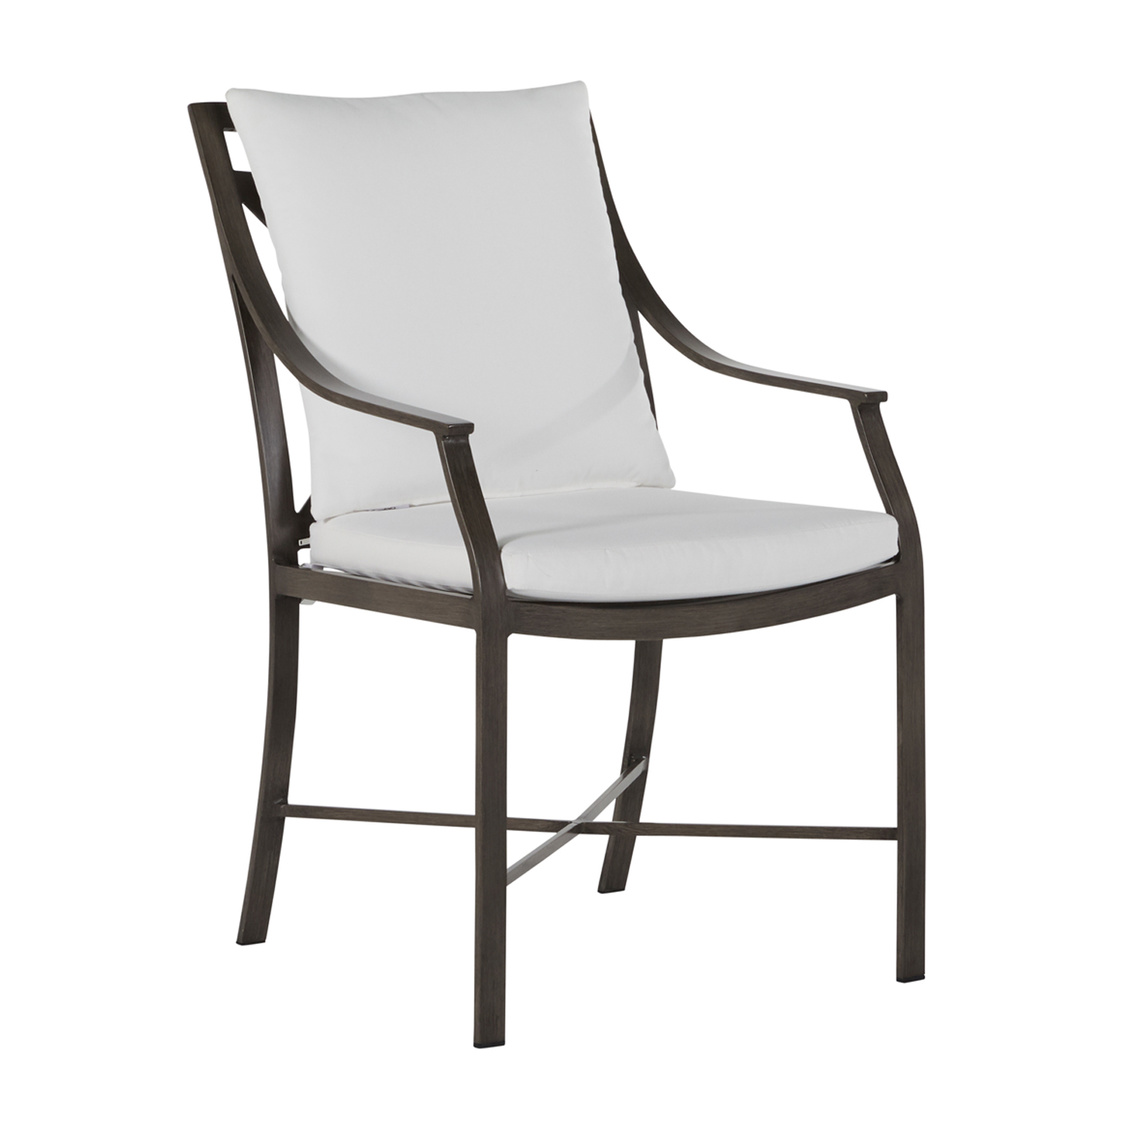 monaco aluminum arm chair in slate grey – frame only product image